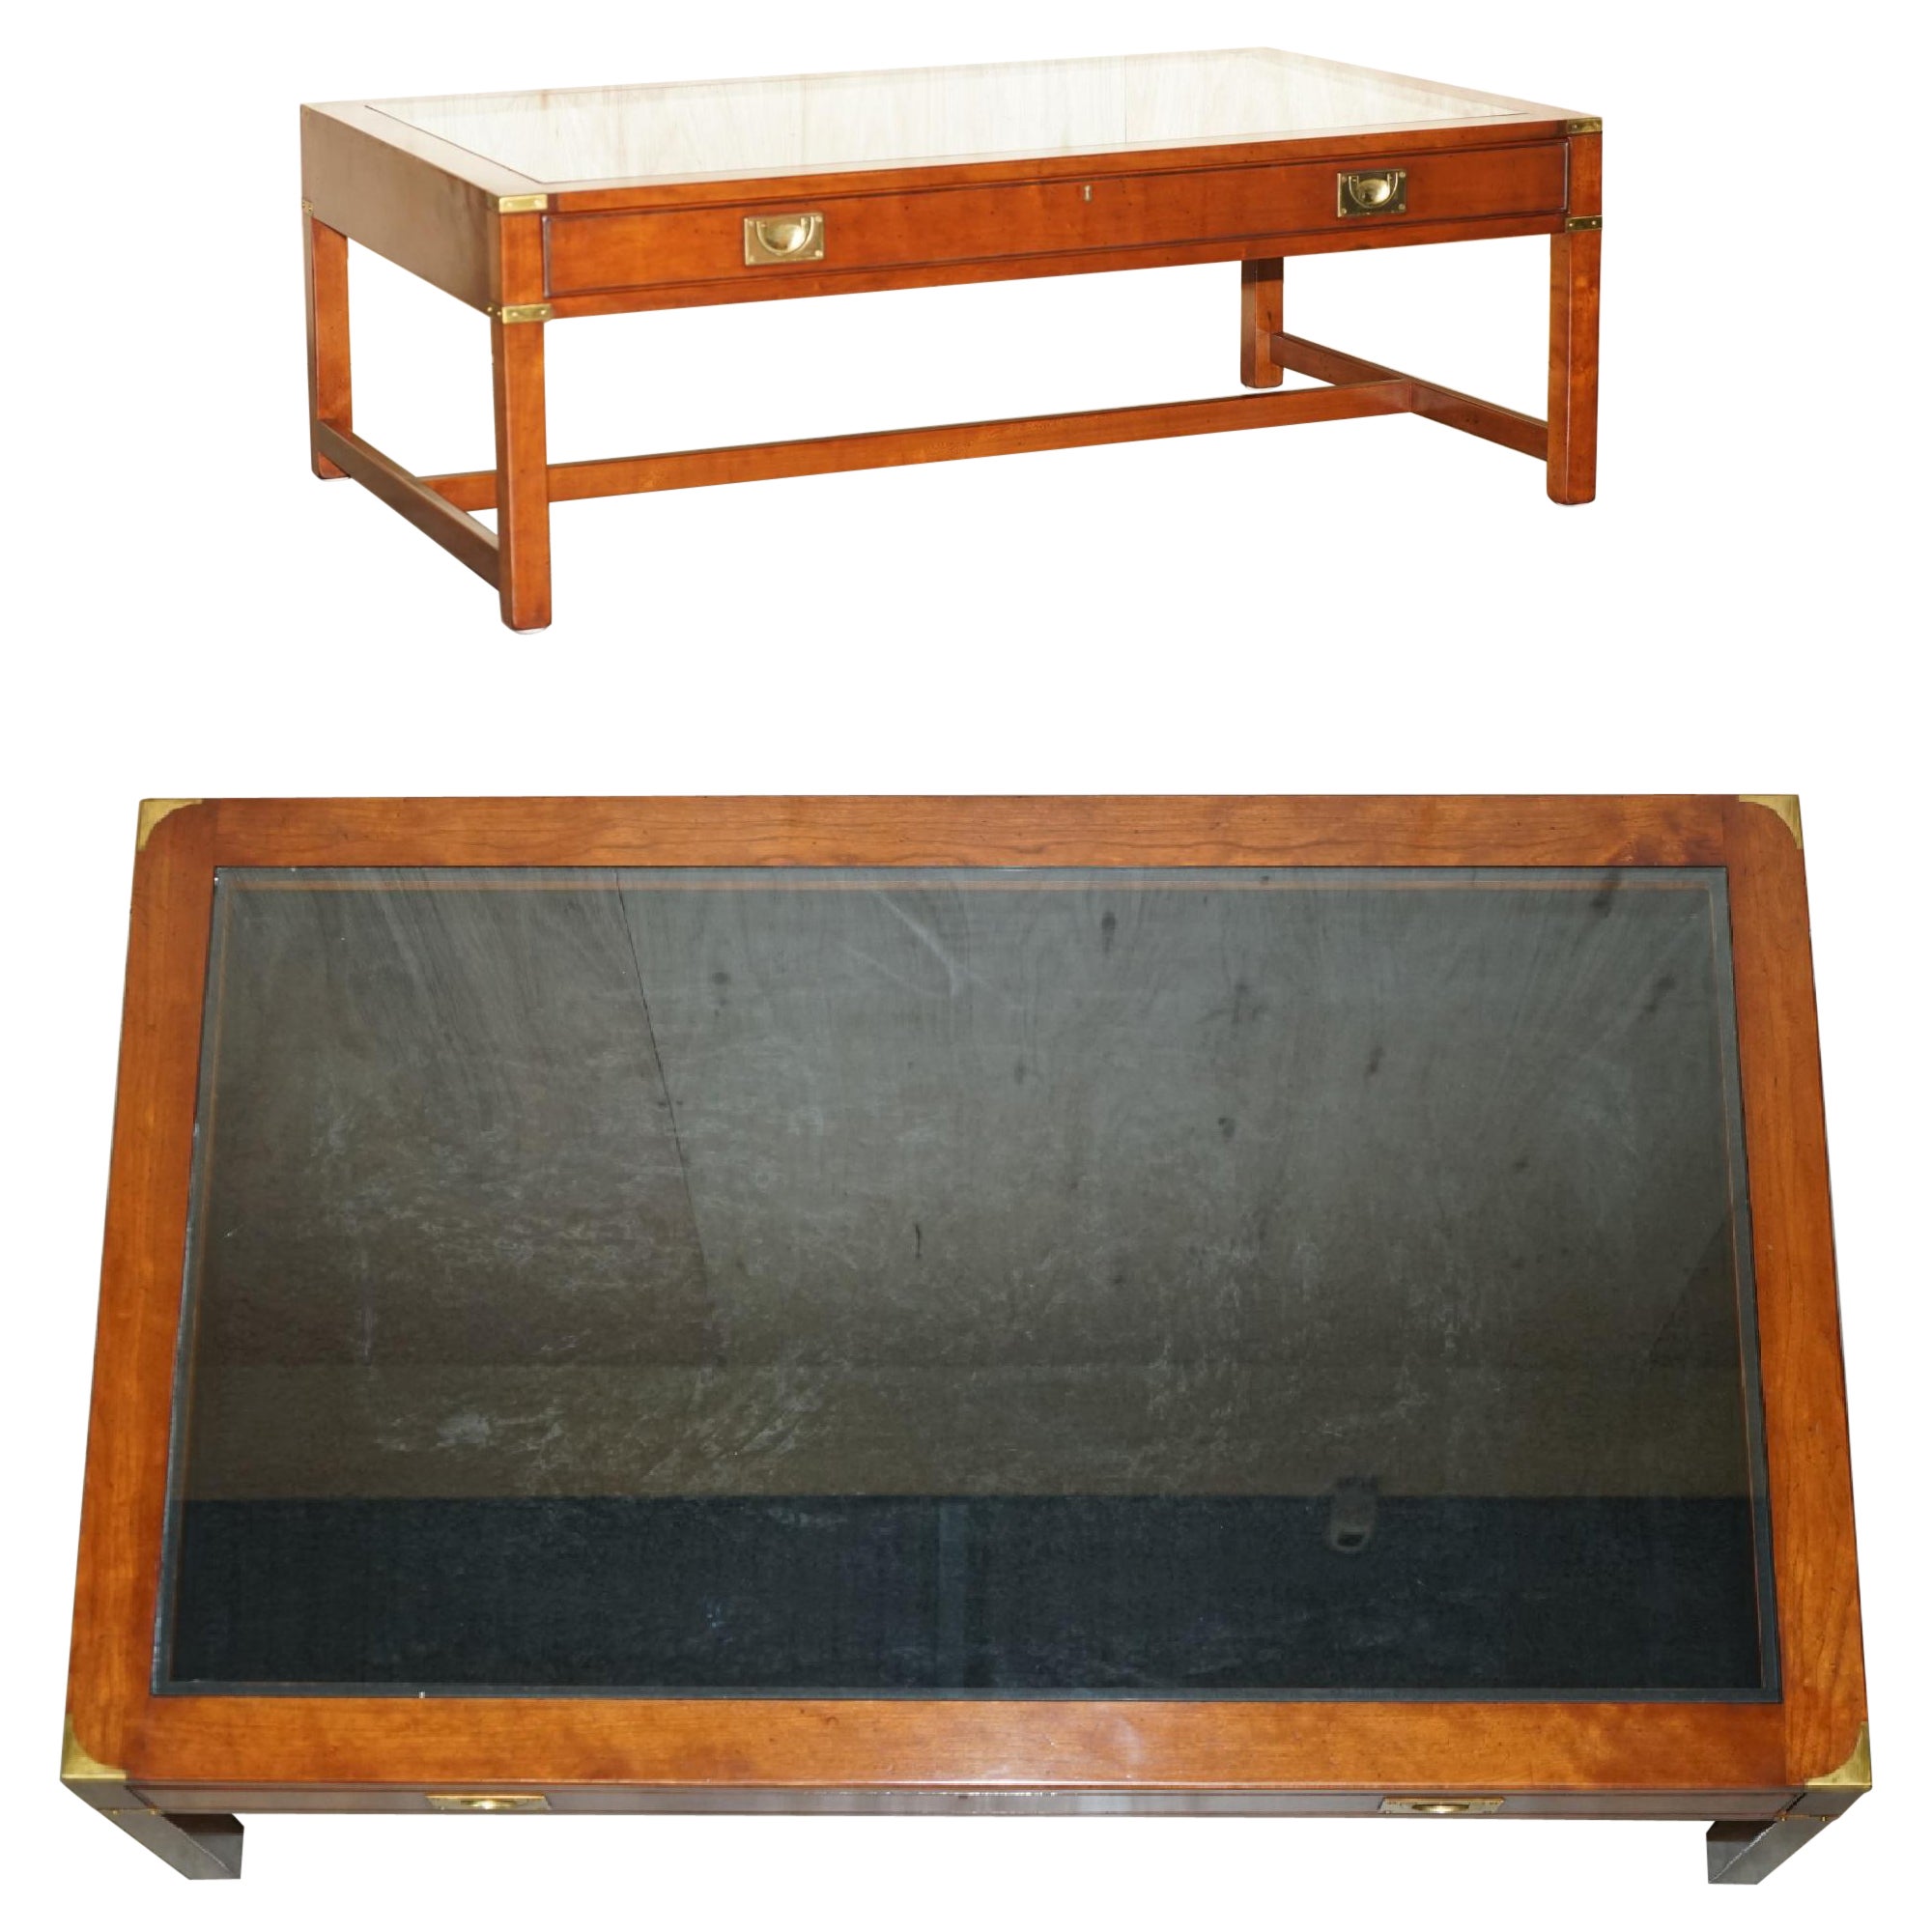 Unique Kennedy Showcase Display Military Campaign Hardwood & Glass Coffee Table For Sale